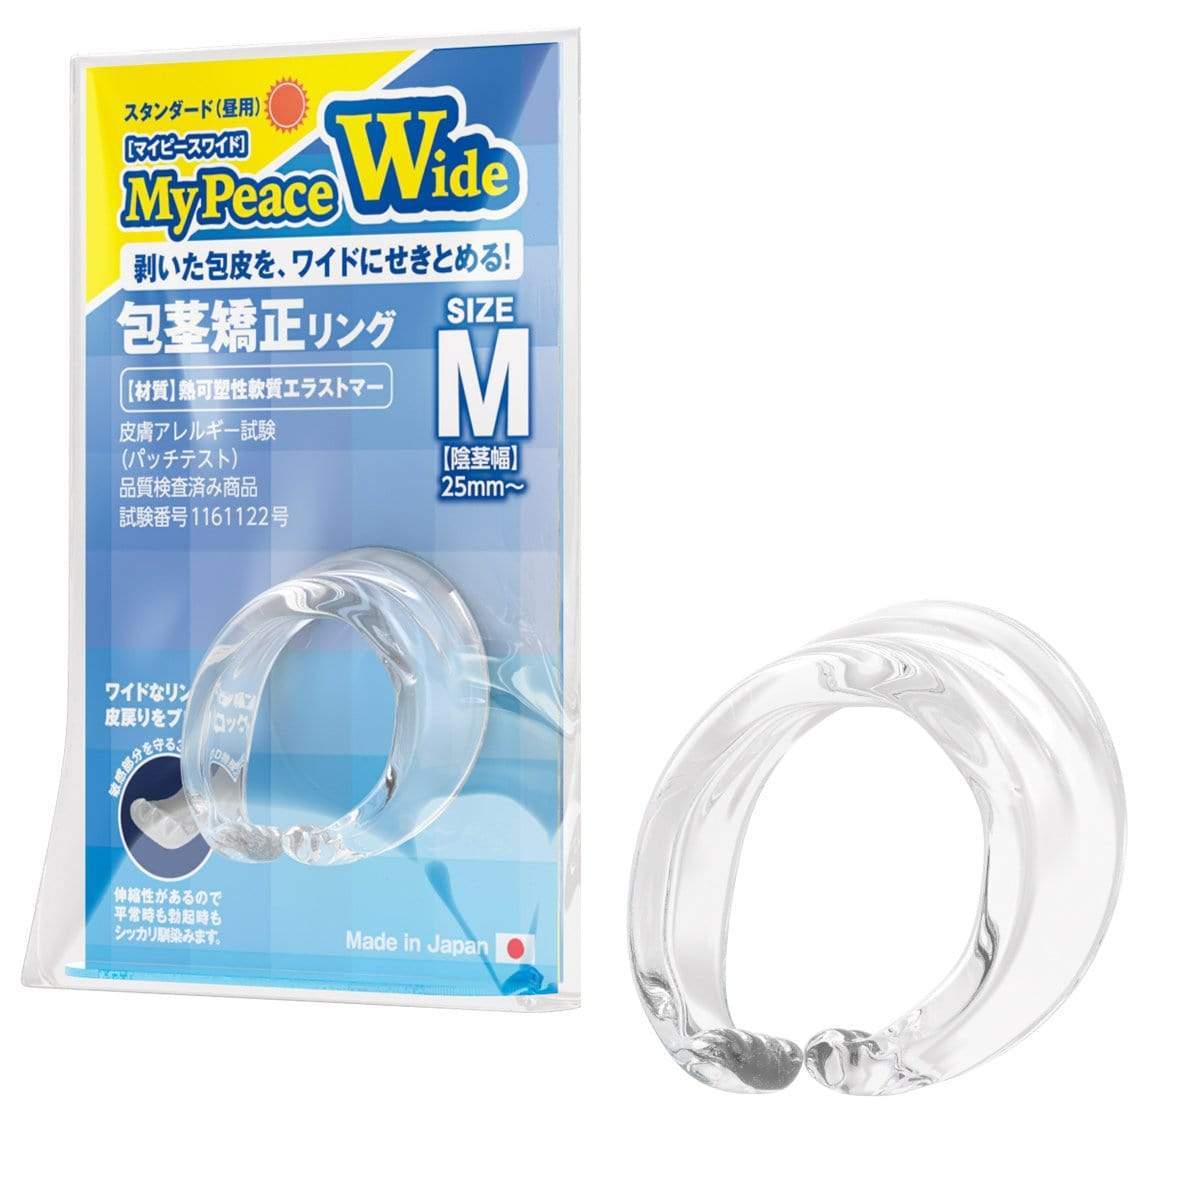 SSI Japan - My Peace Wide Standard Day Size M Correction Cock Ring (Clear) -  Cock Ring (Non Vibration)  Durio.sg